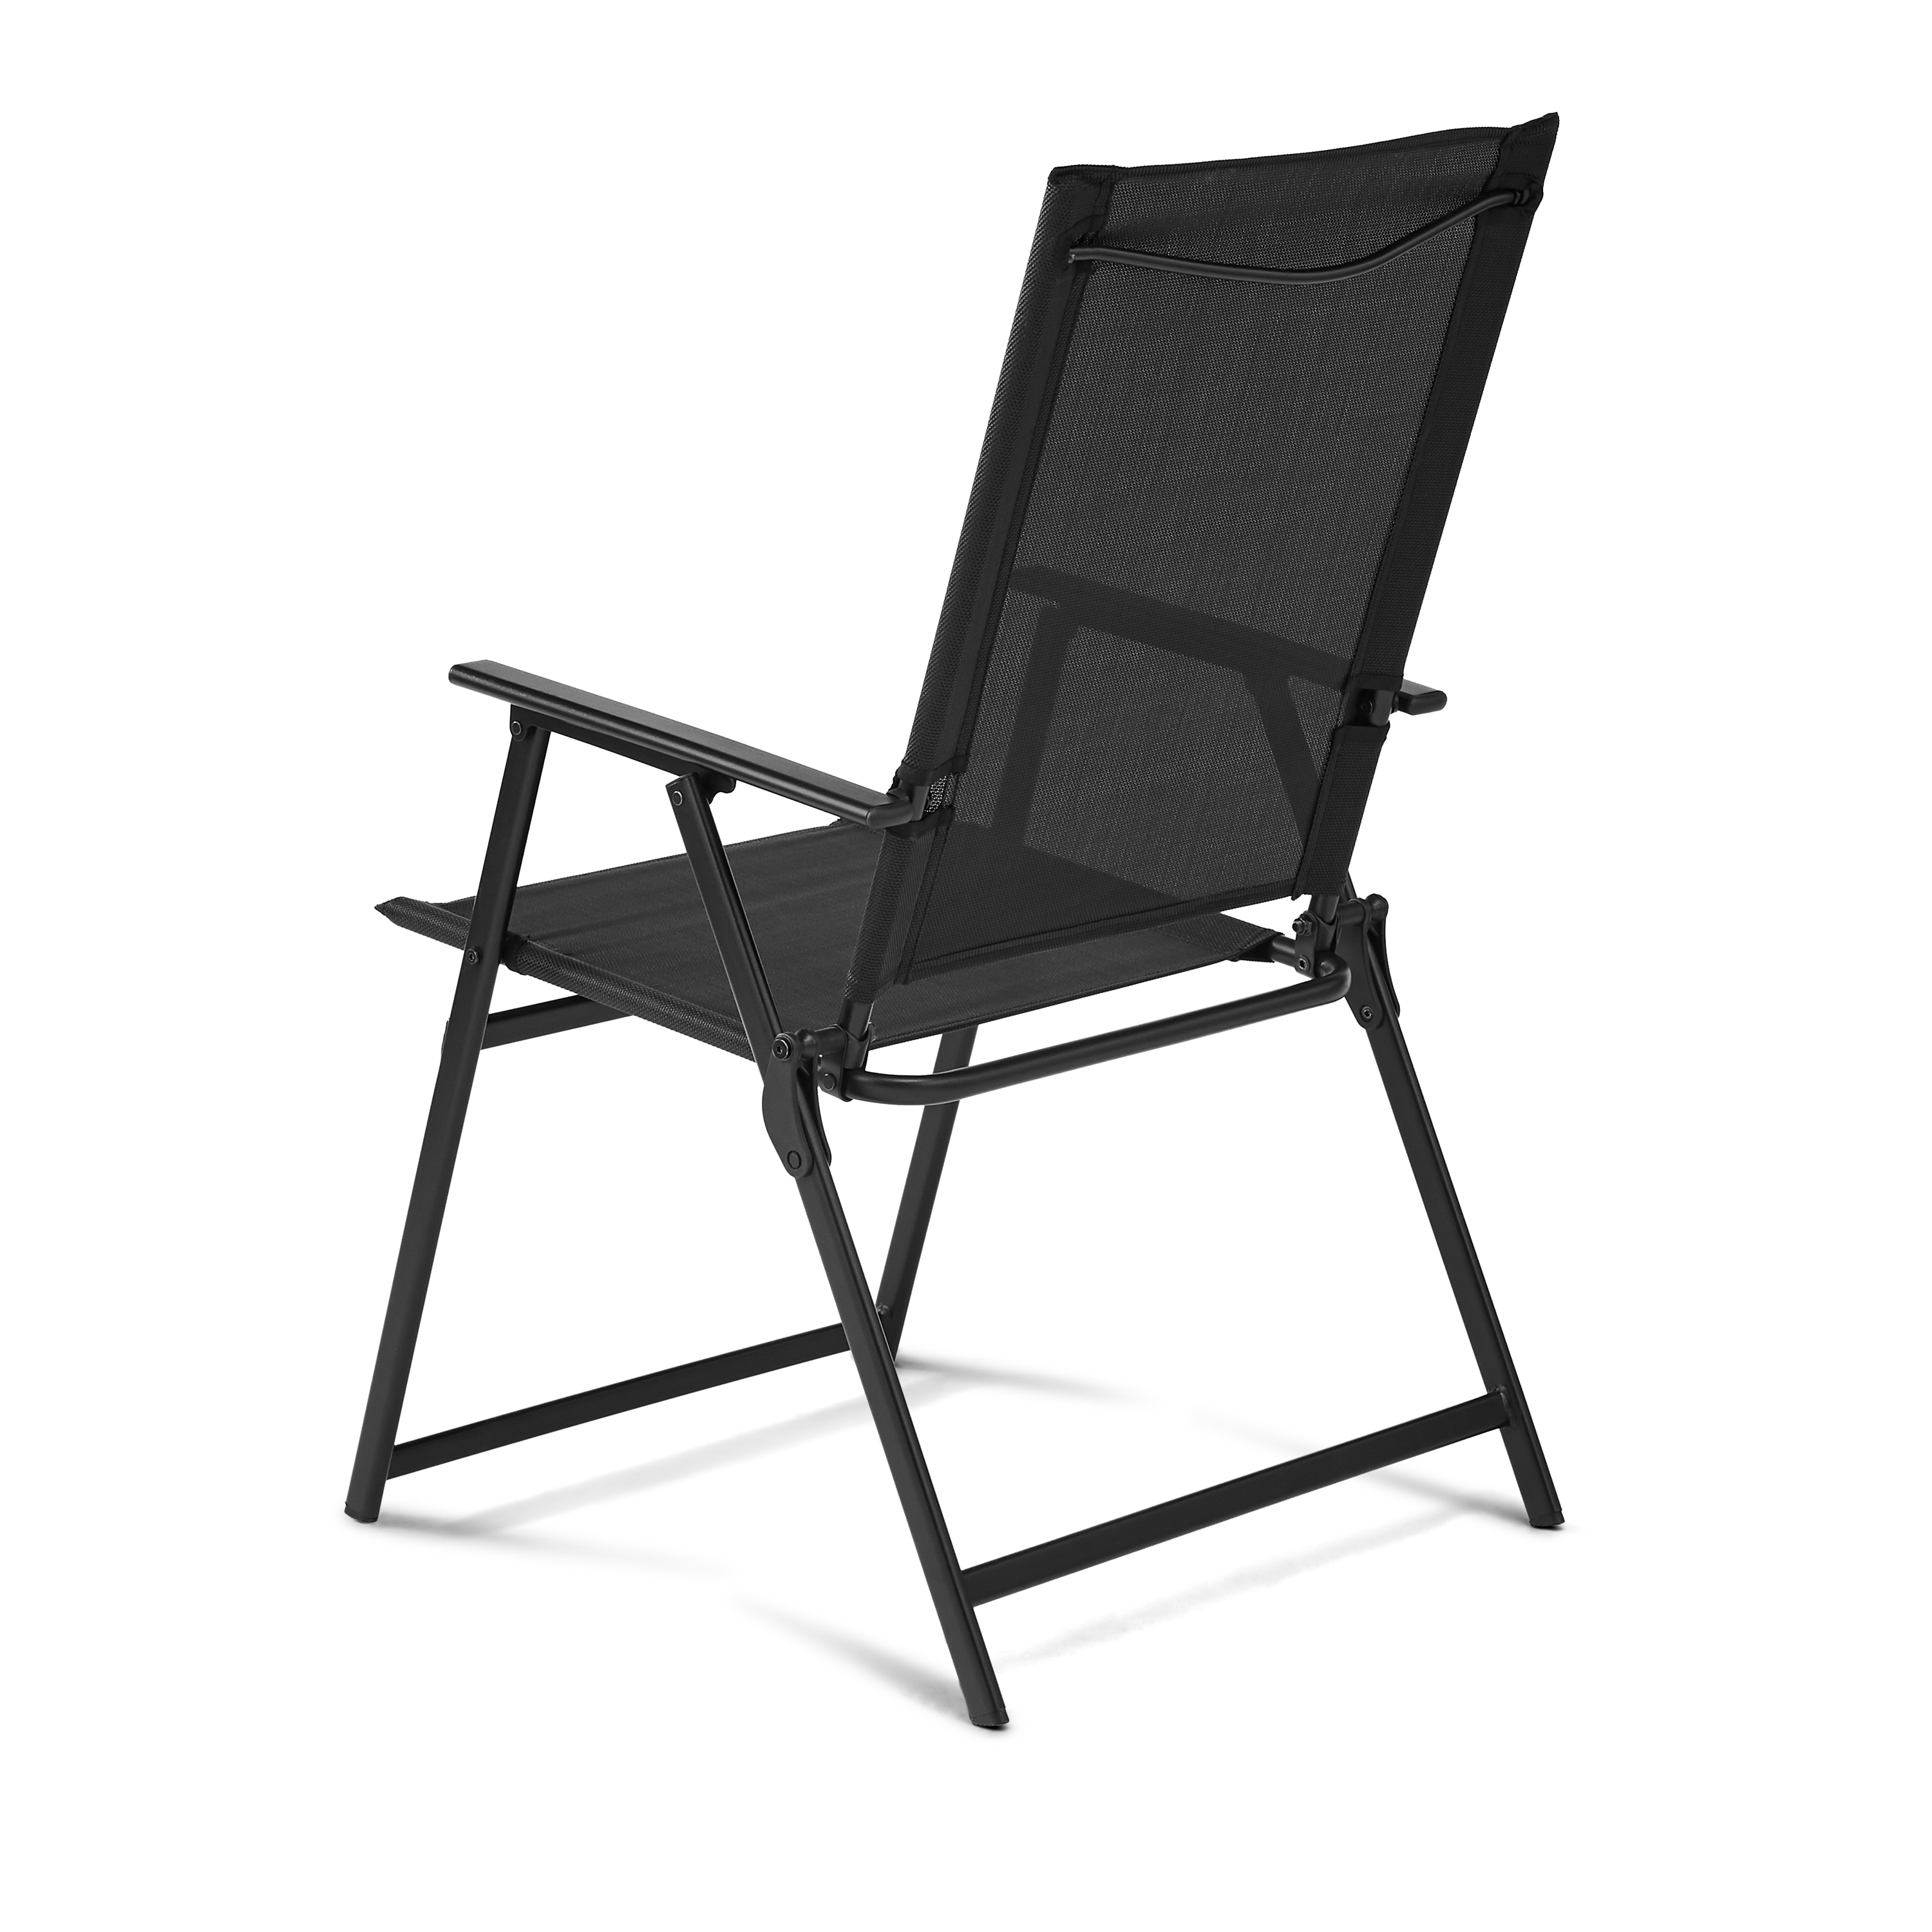 Mainstays Greyson Steel and Sling Folding Outdoor Patio Armchair - Set of 2, Black - image 4 of 8